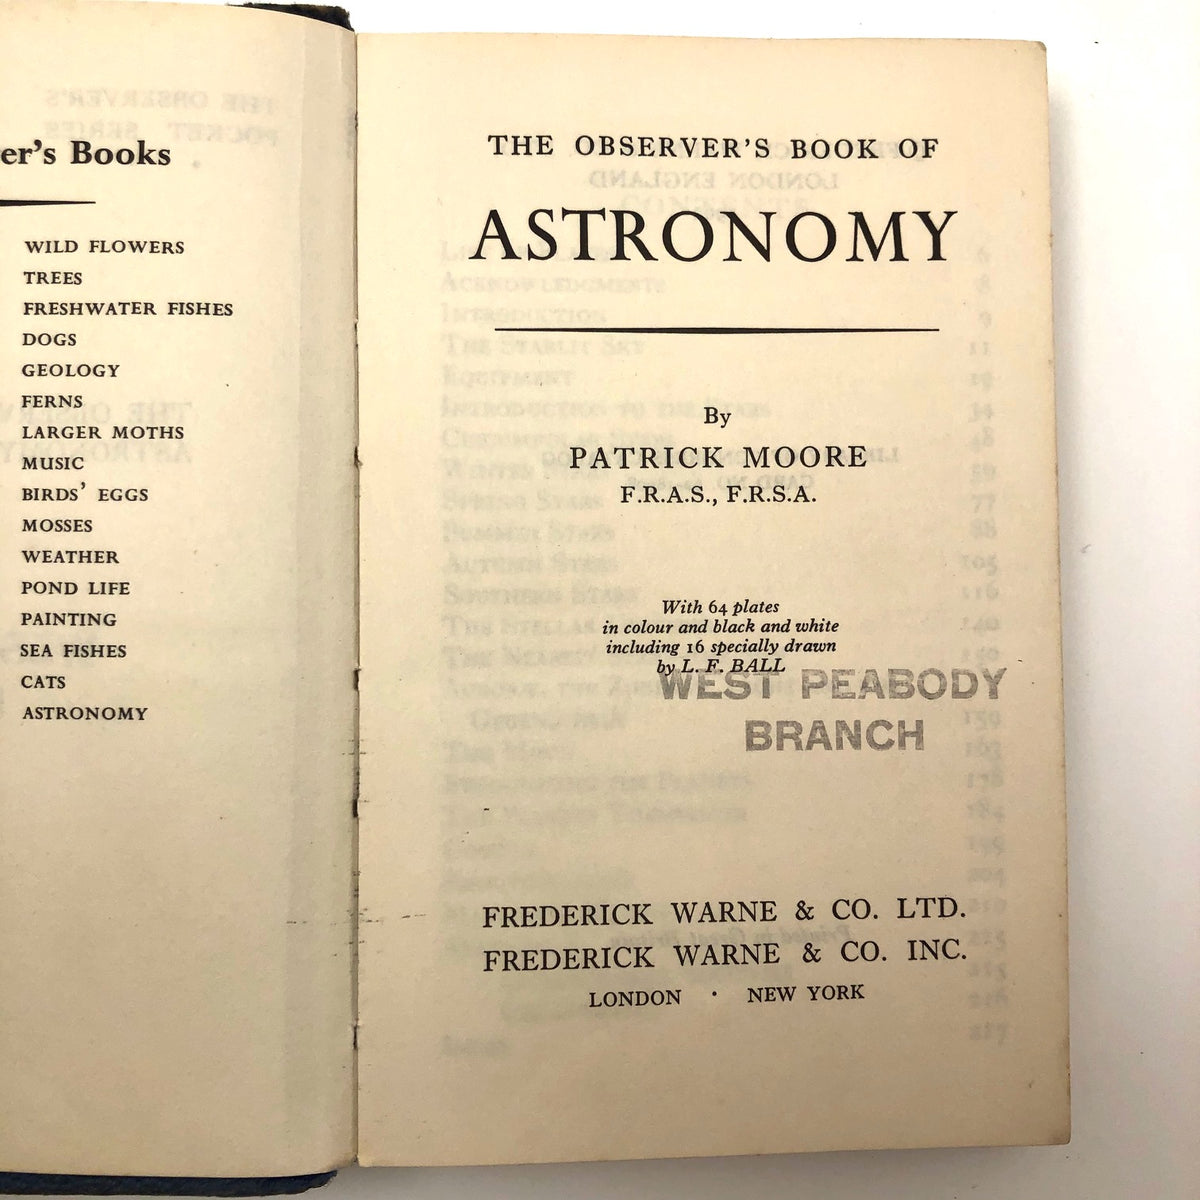 Annals of Philosophy. 1814.] Astronomical Mean of Observatioos in Jan.. f  Morniog •J NuOD t Kvening MorniH;; Noon Evening Morning Noon Kvcning  Morning Noon Evening Morning Noon Evening ( Morning •<oon (